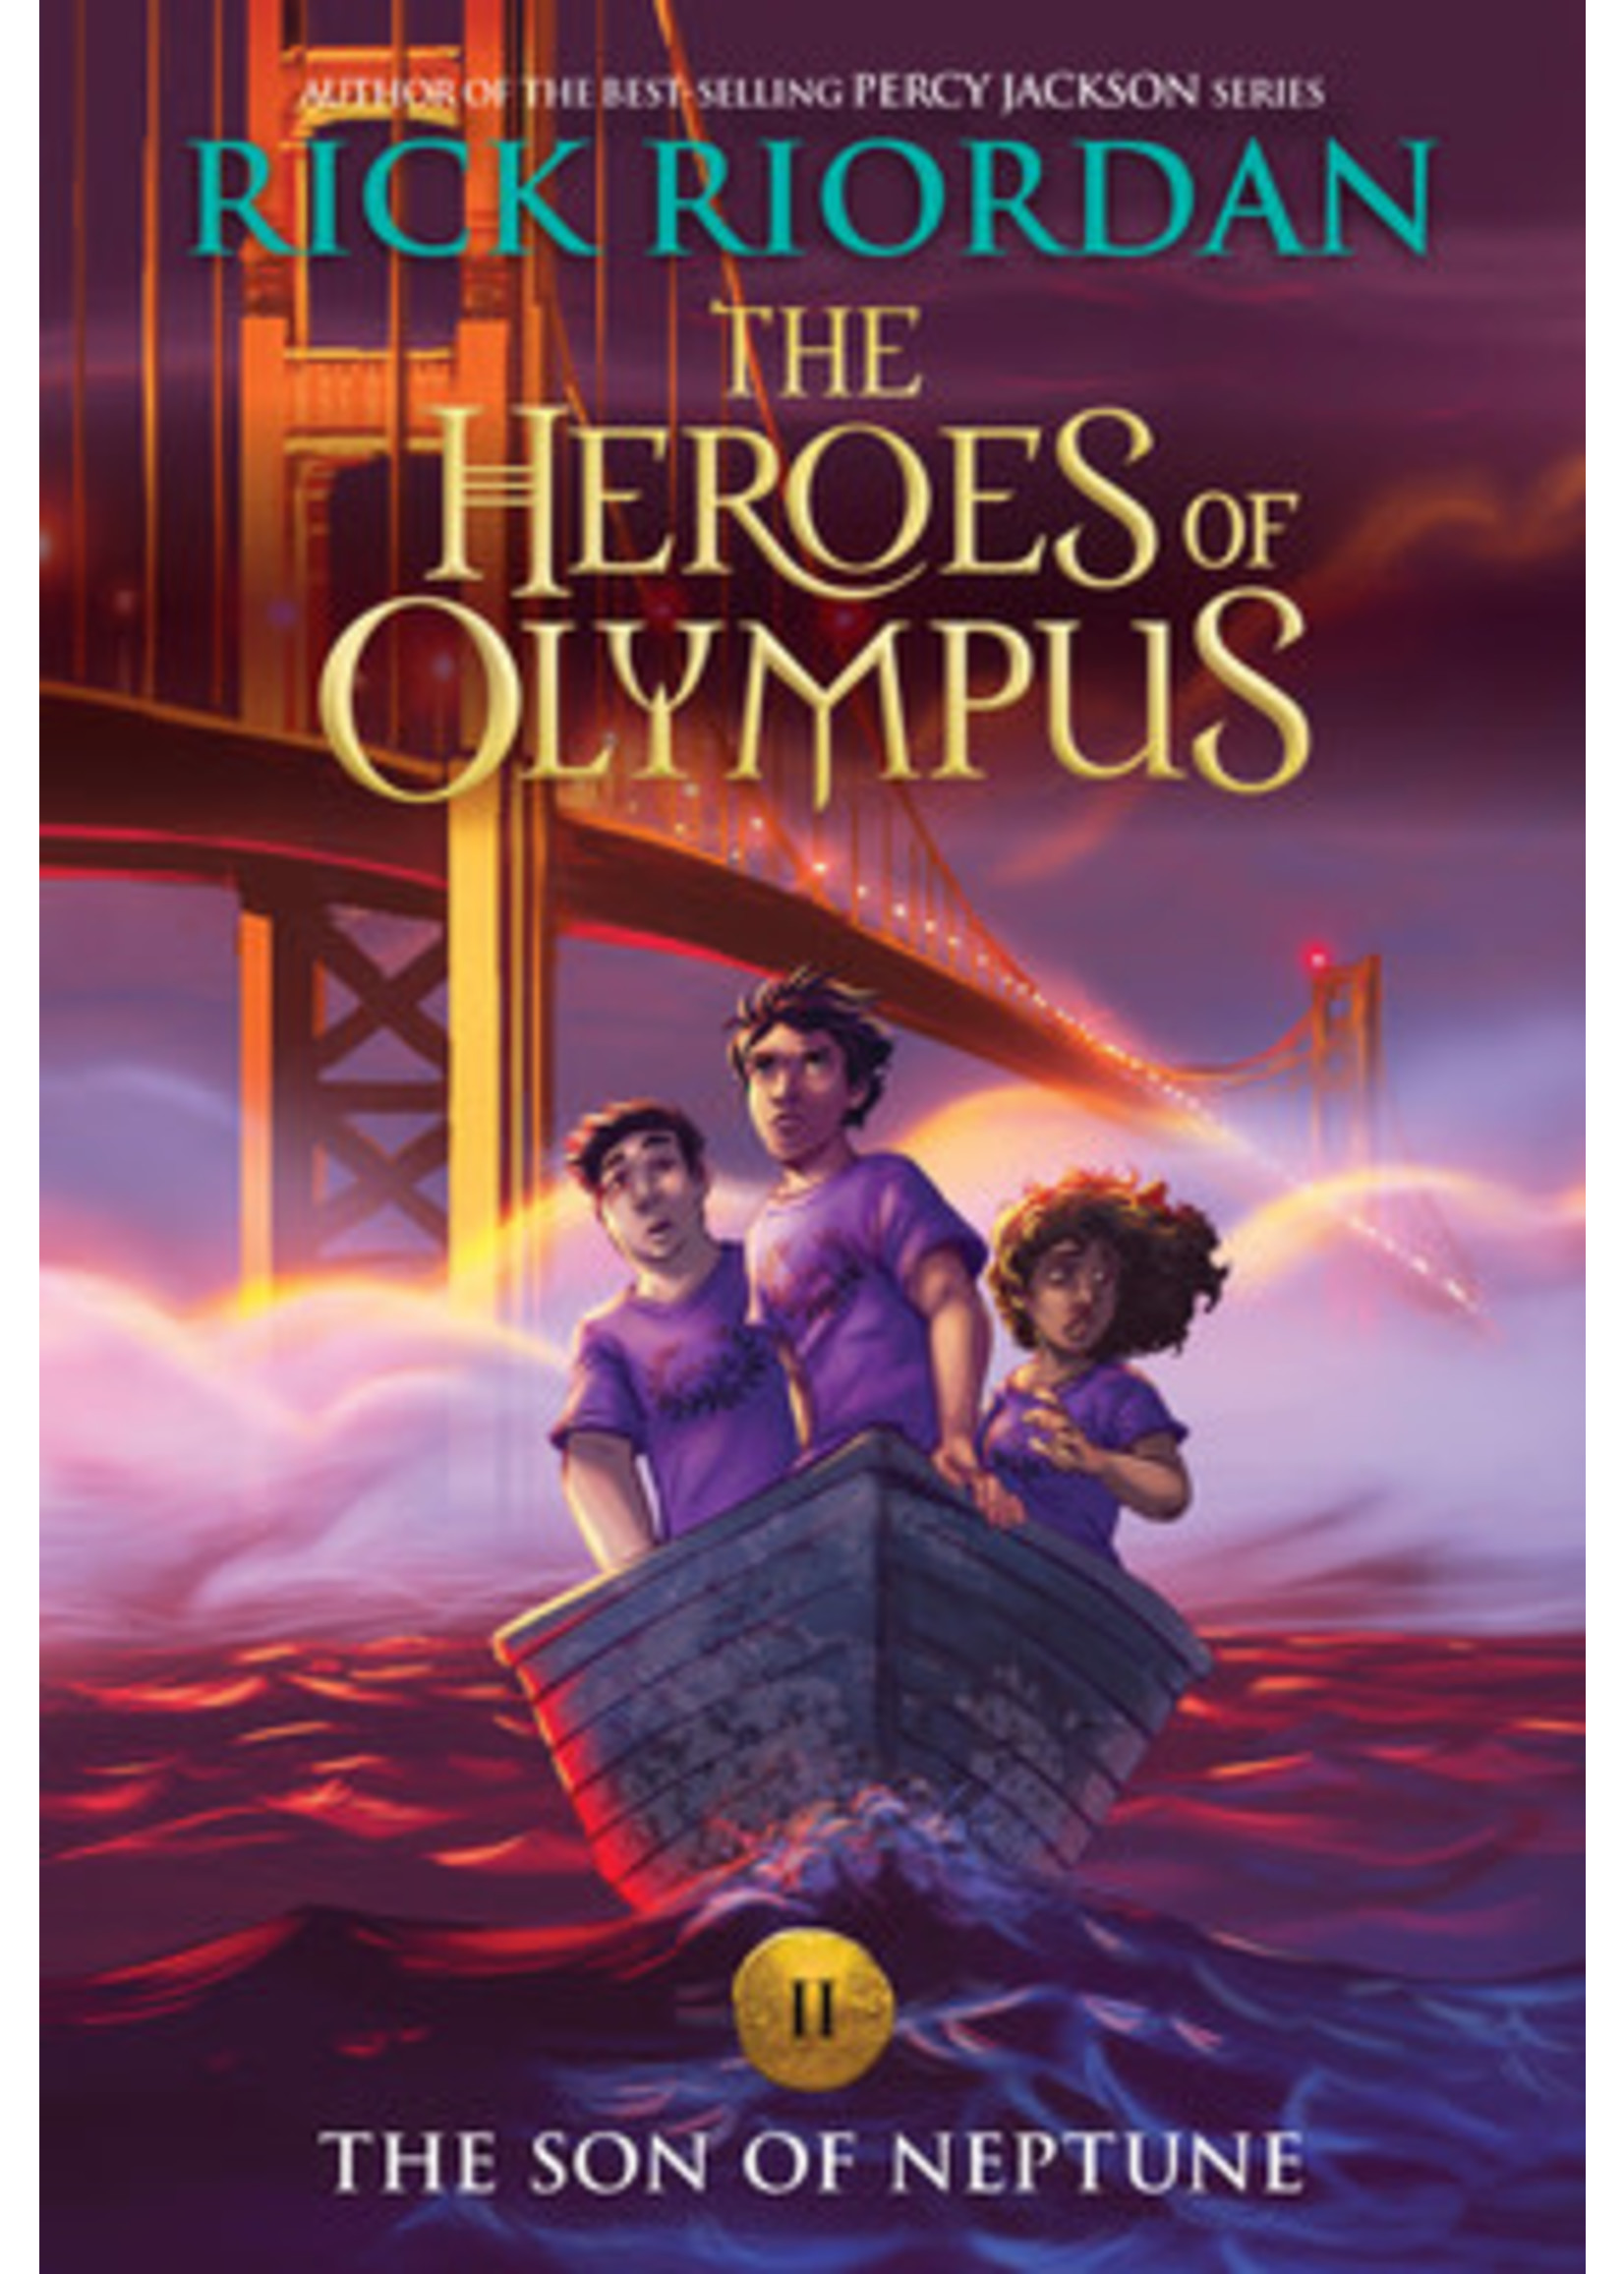 The Son of Neptune (The Heroes of Olympus #2) by Rick Riordan